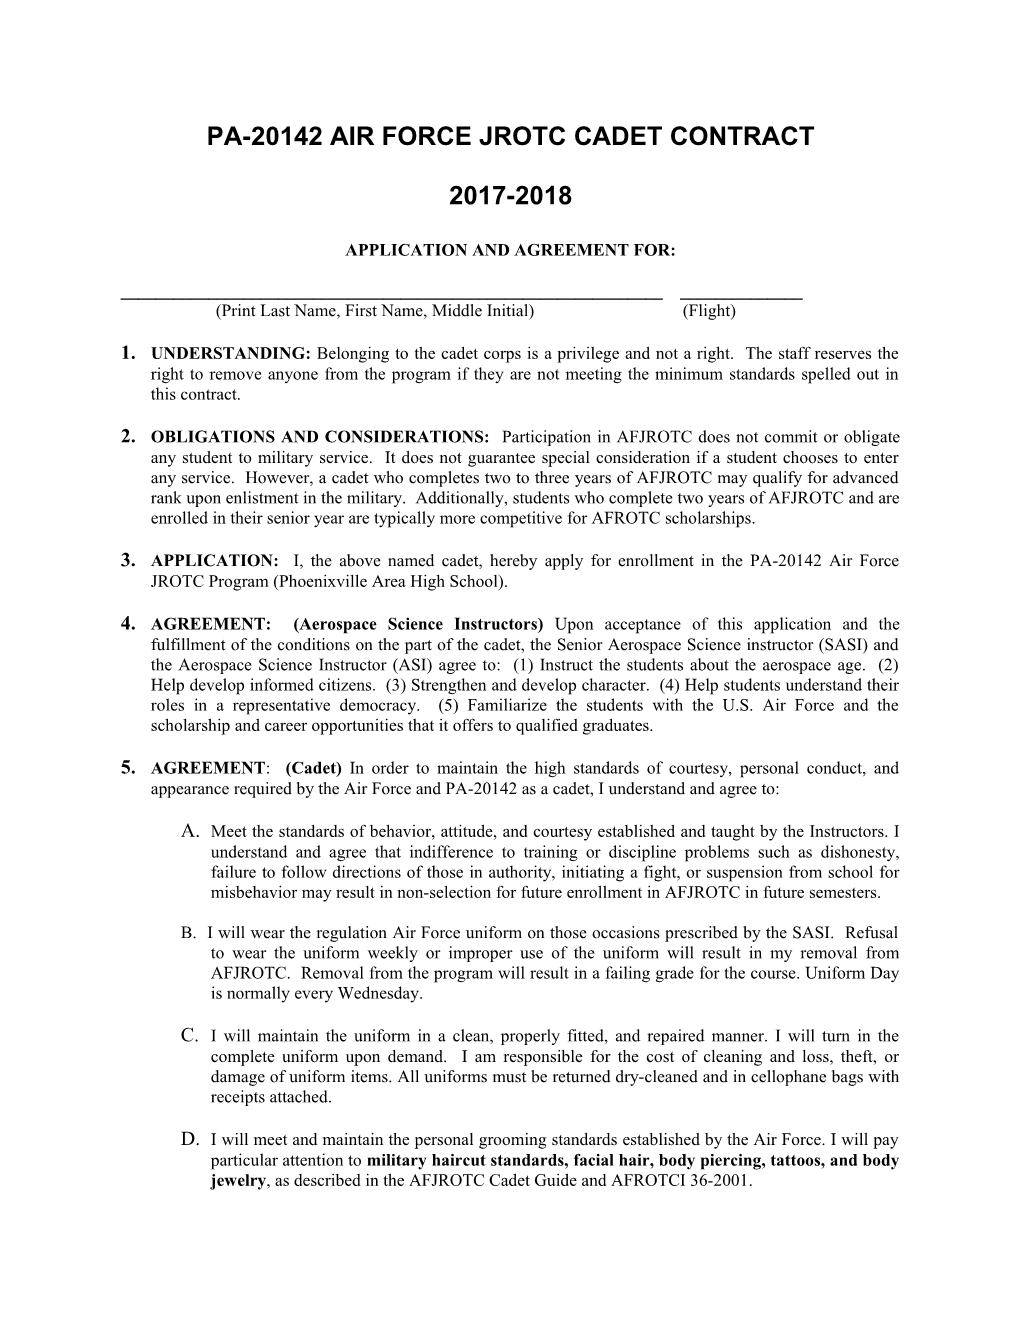 Pa-20142 Air Force Jrotc Cadet Contract